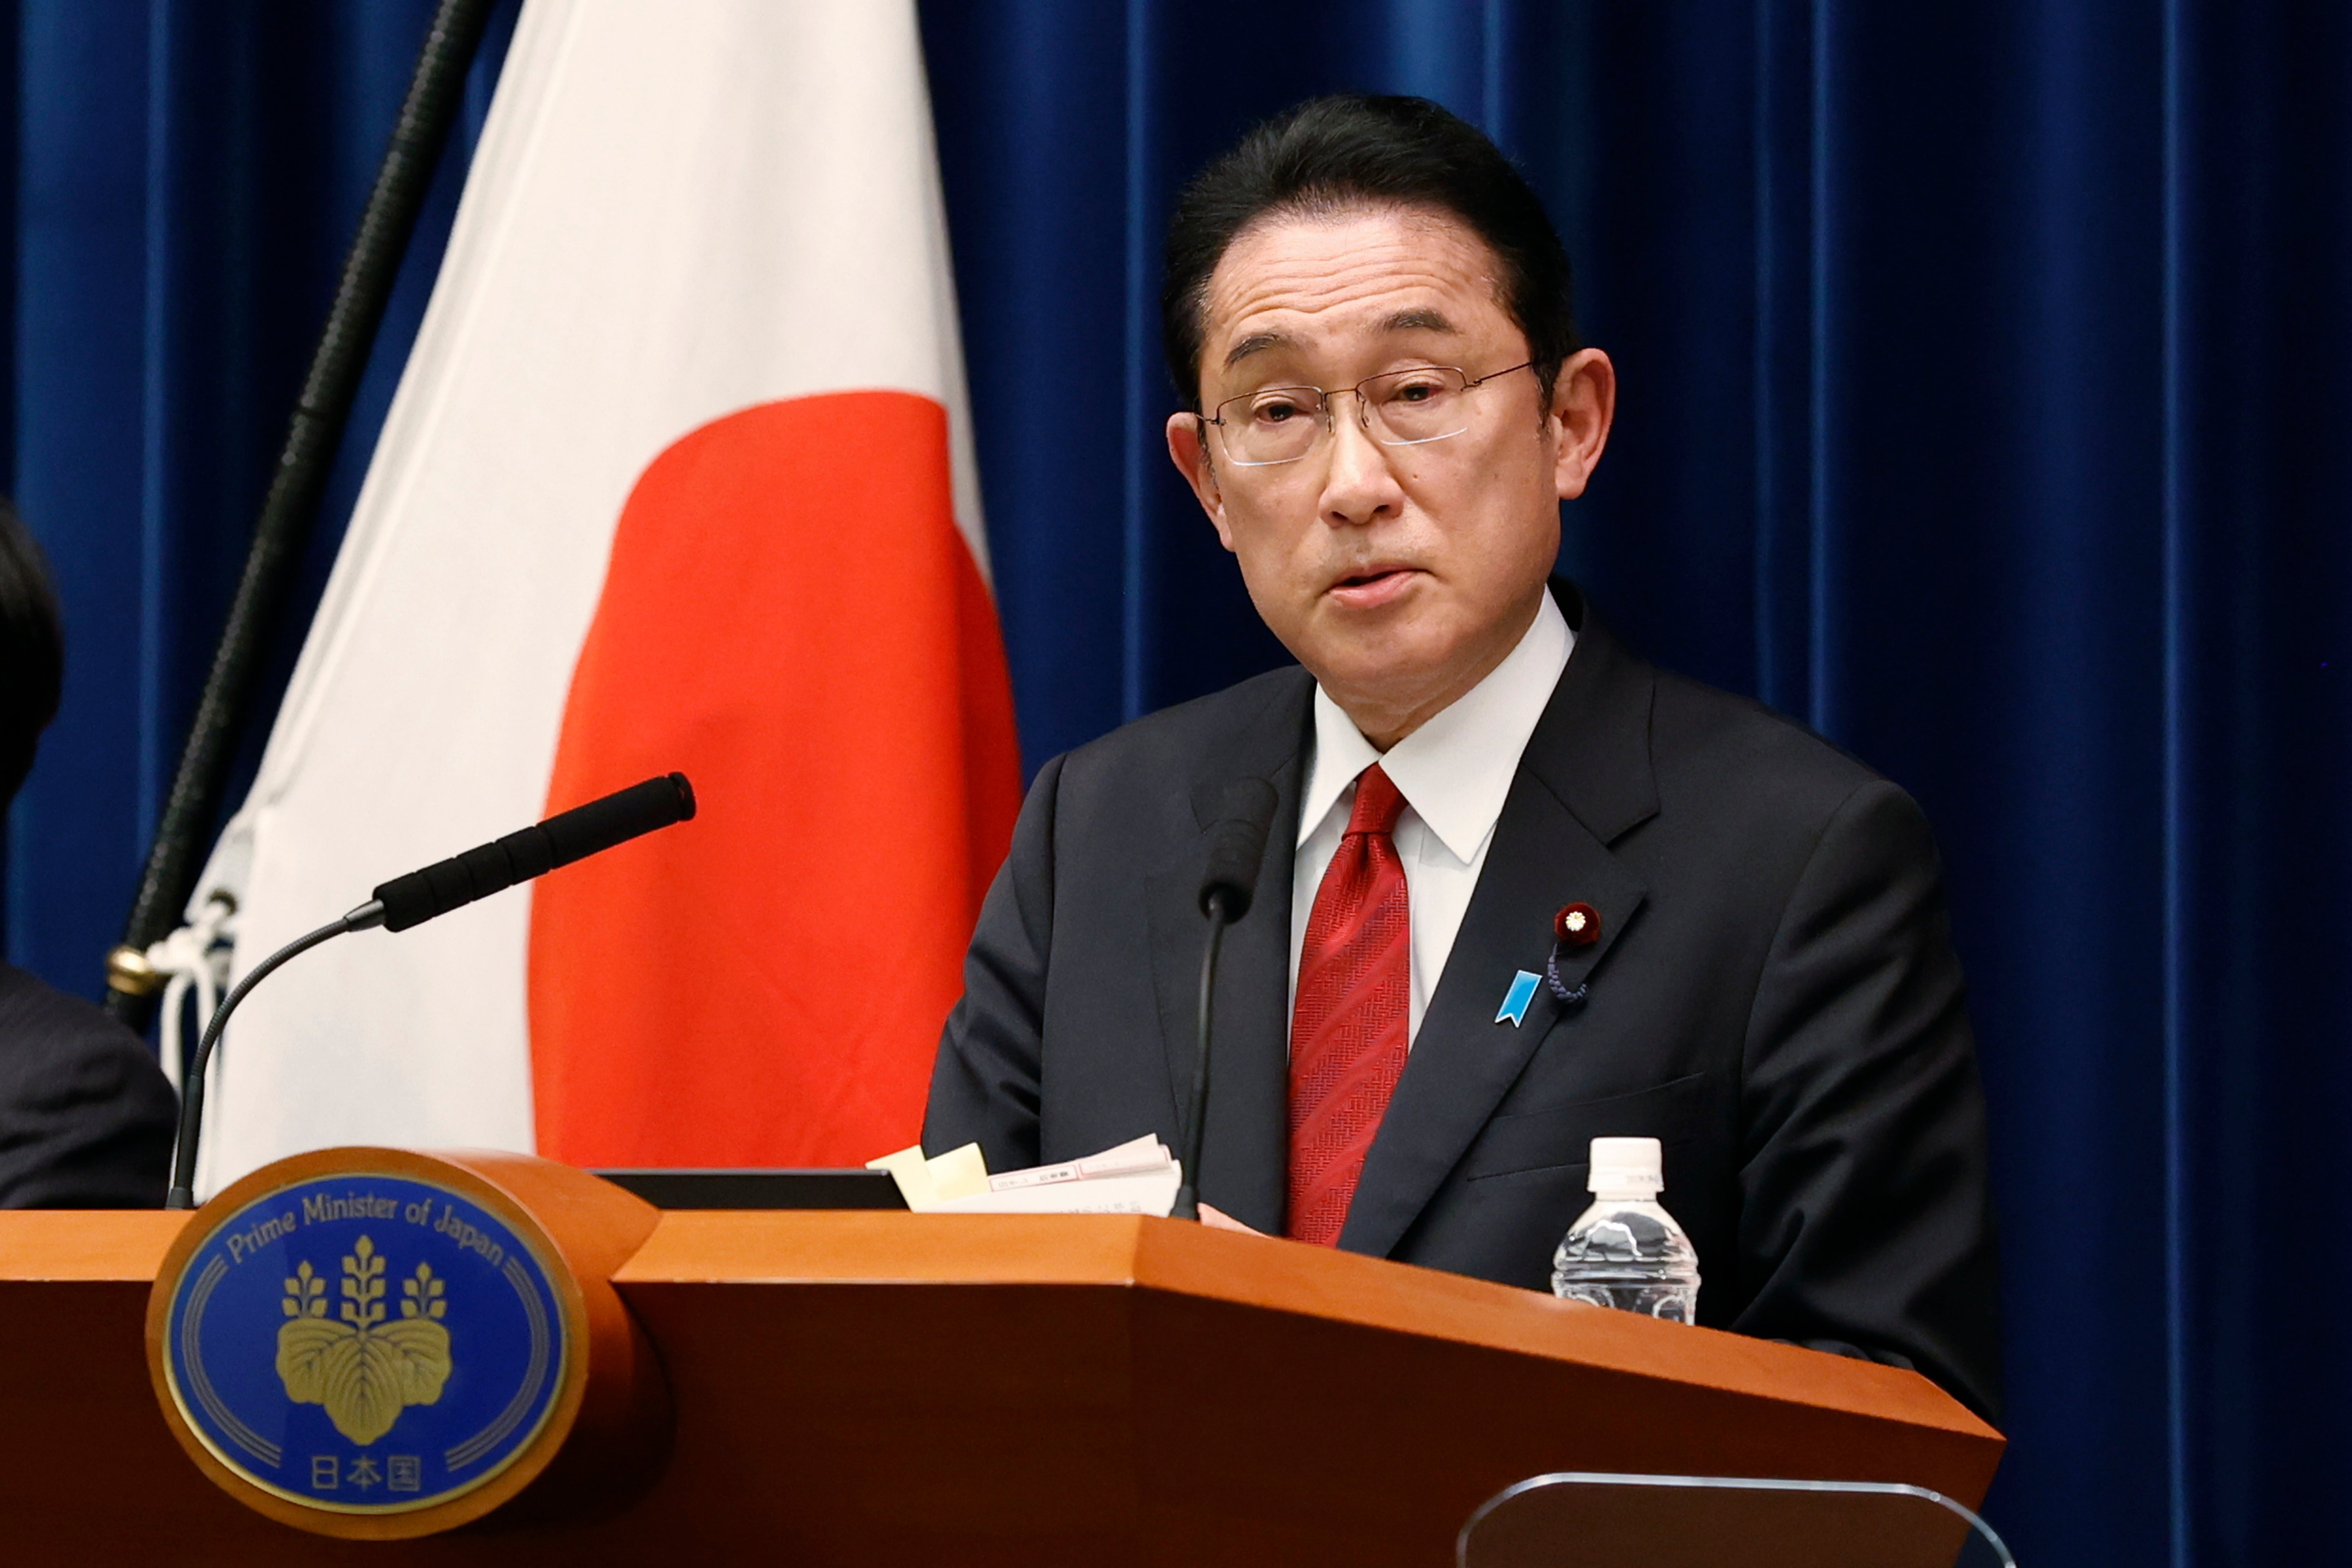 Japan’s prime minister Fumio Kishida speaks during a news conference at the prime minister’s official residence on 8 April